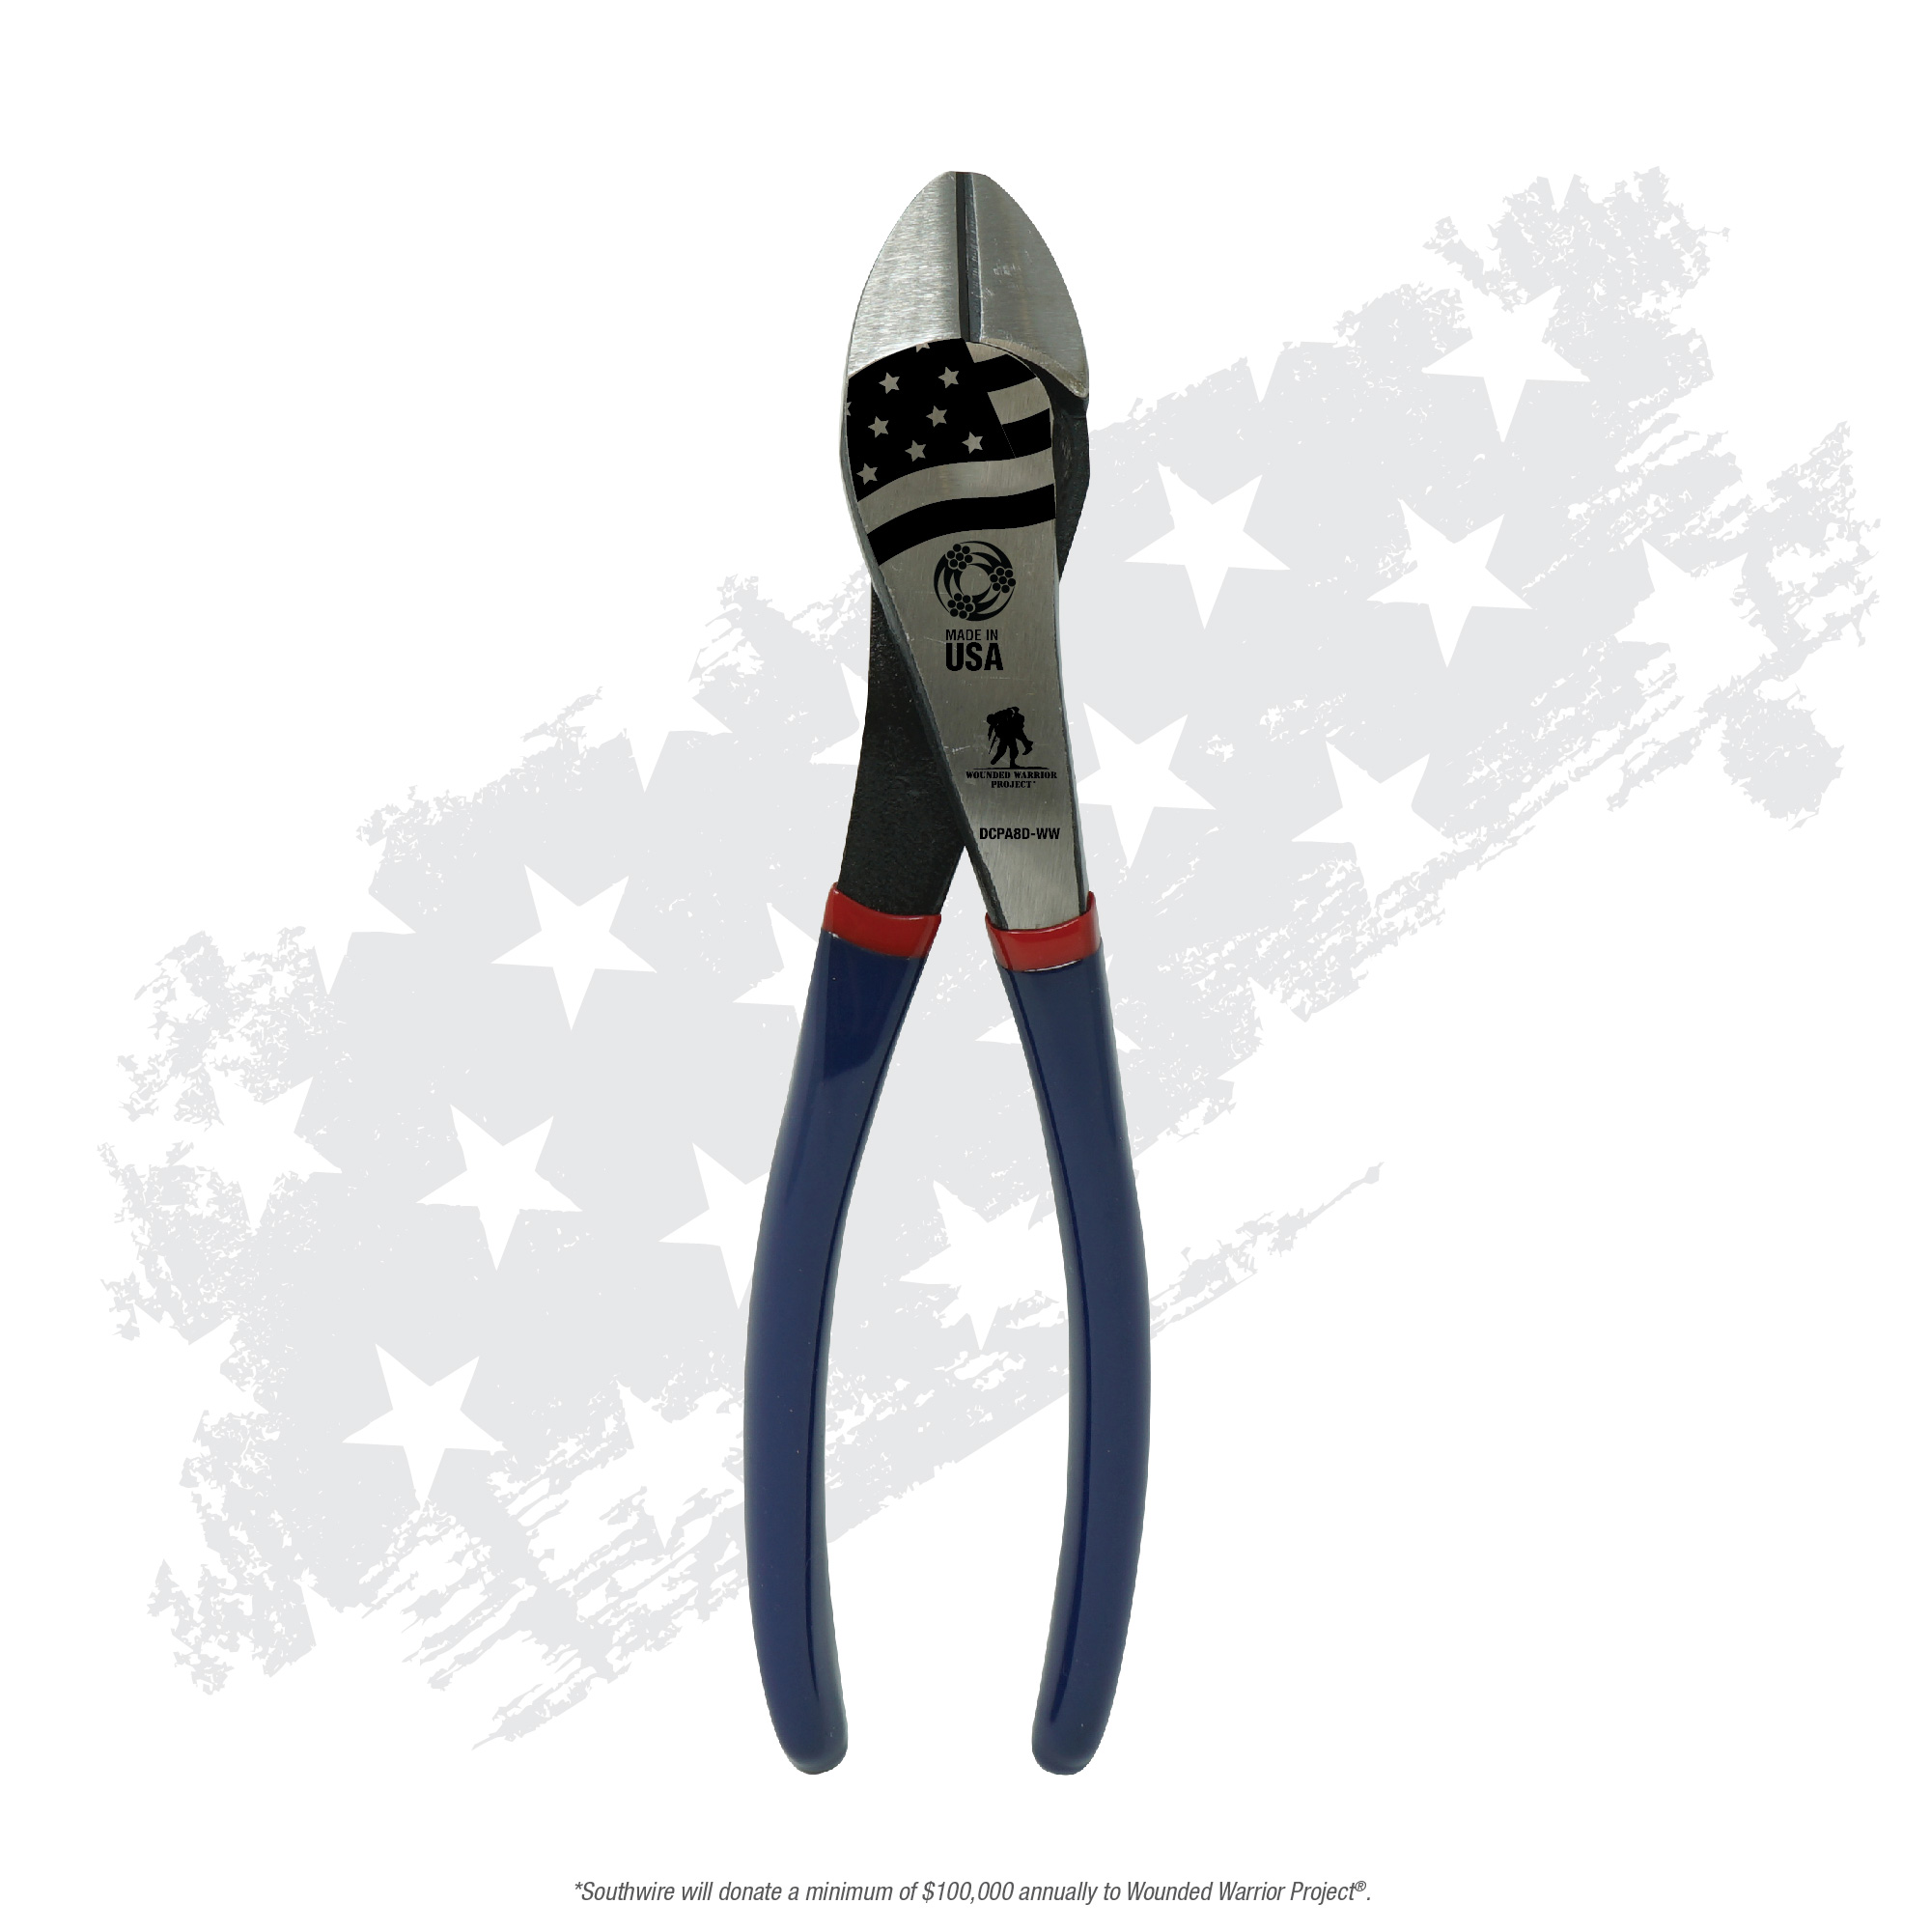 DCPA8D-WW, Southwire 8" Diagonal Cutting Pliers, Angled Head, Dip Grip, Wounded Warrior Project